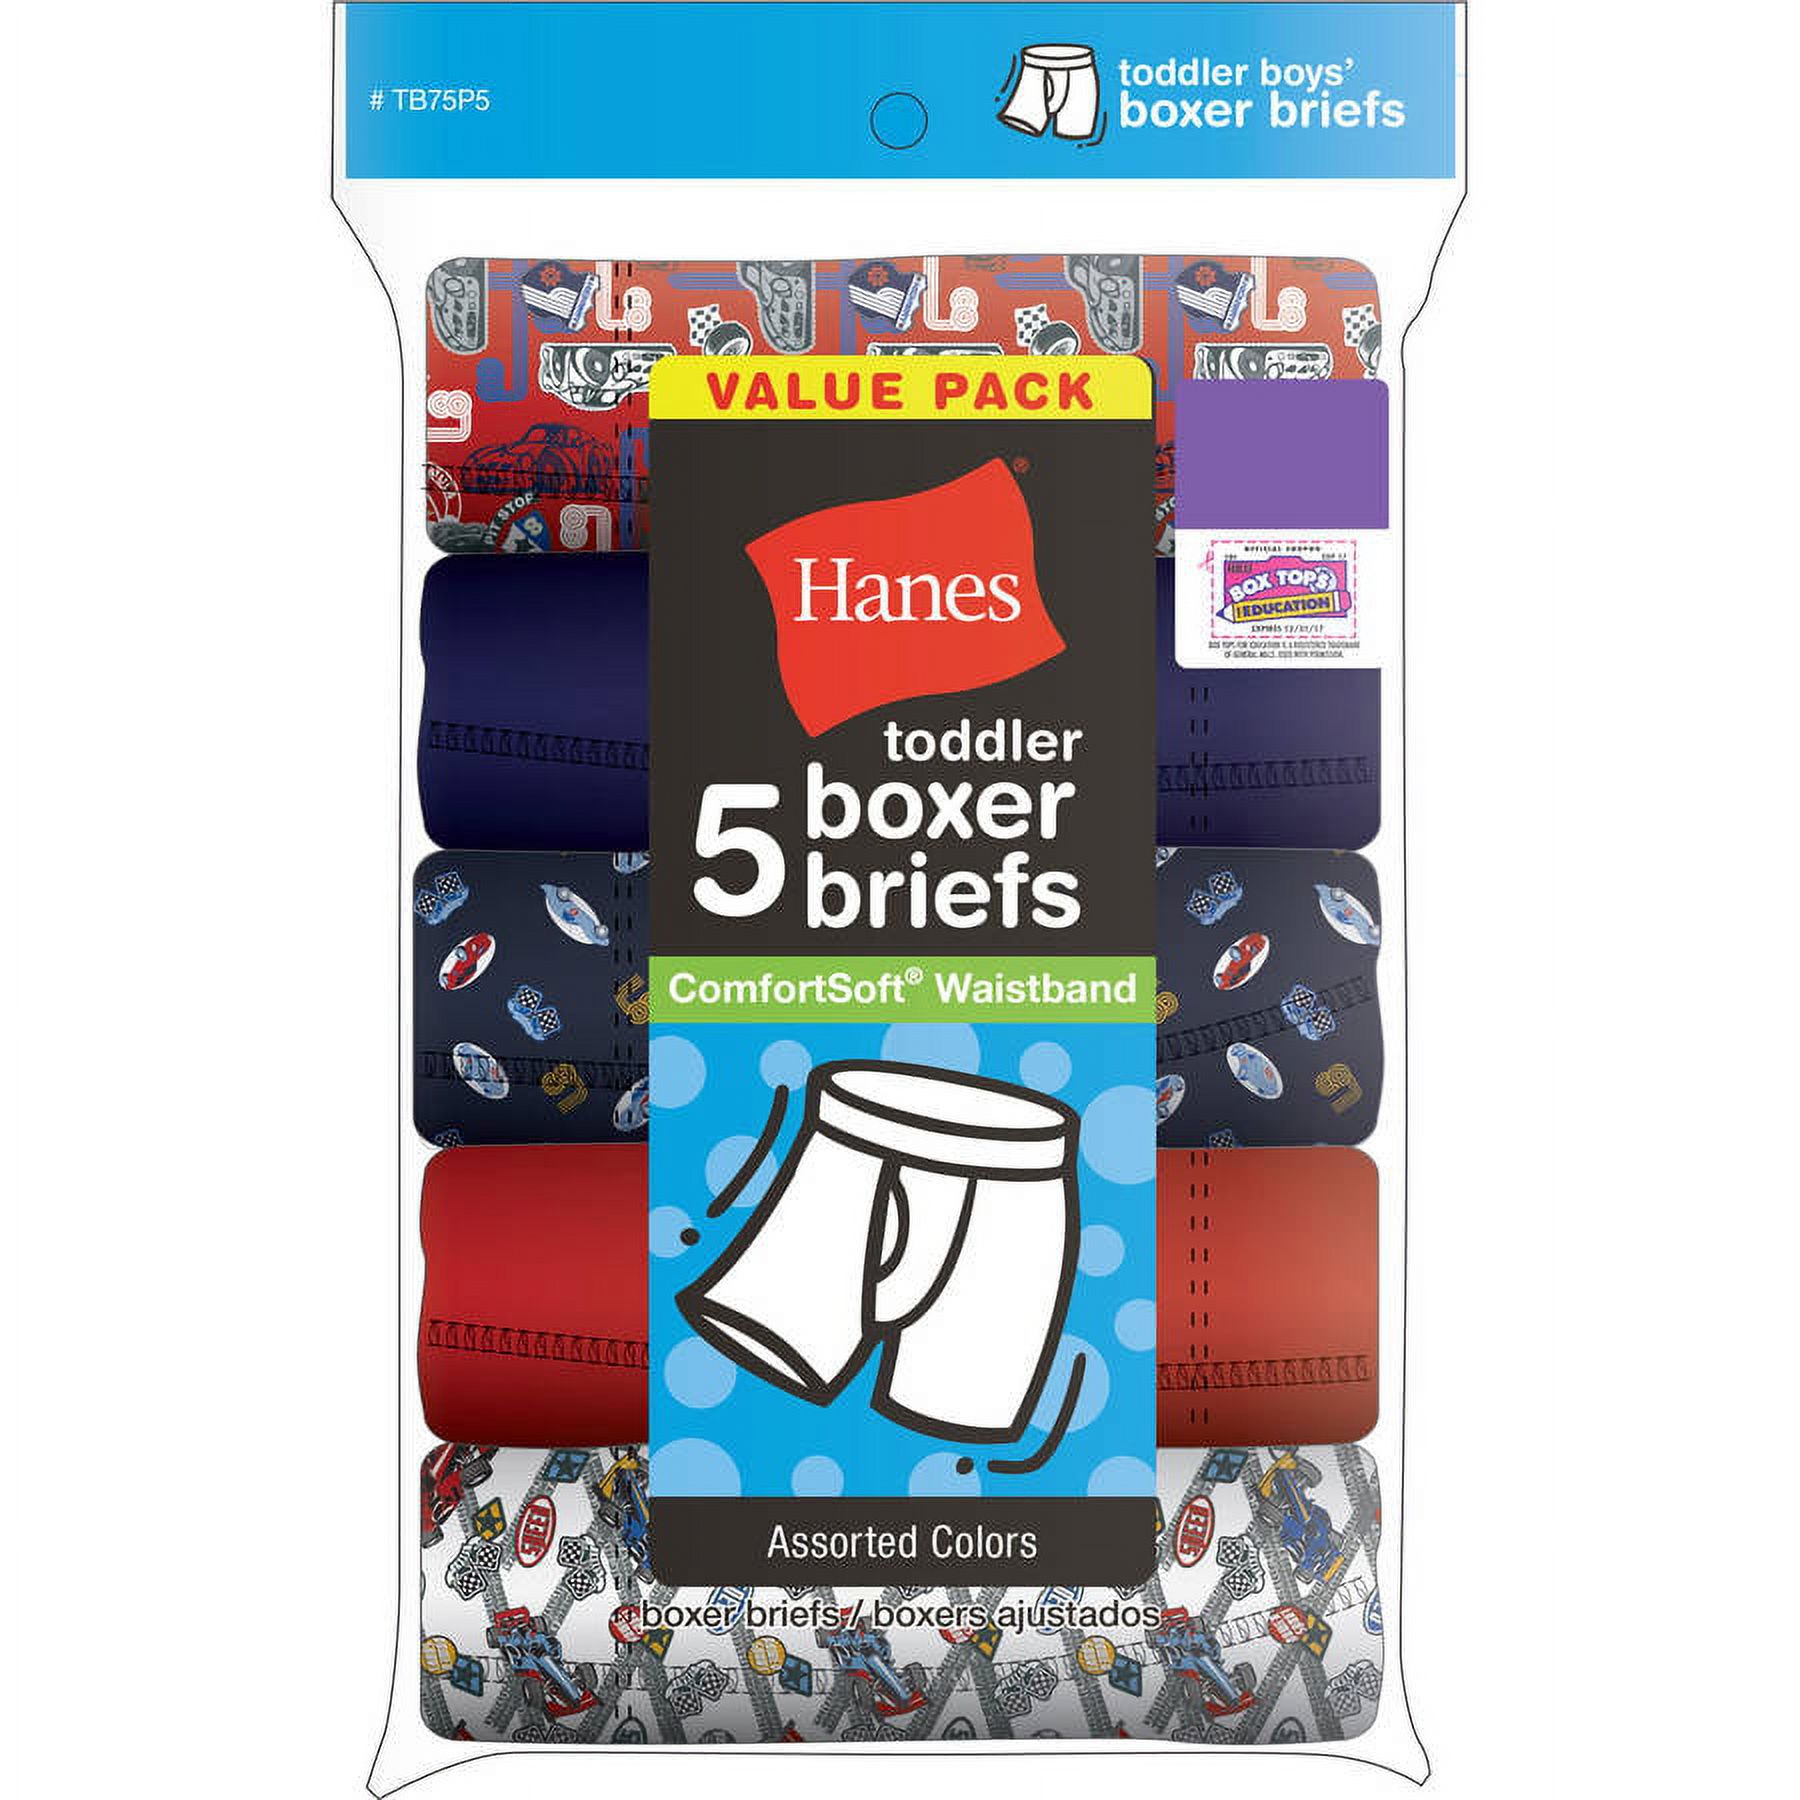 Hanes Toddler Boy Comfortsoft Boxer Brief Underwear, 5 Pack, Sizes 2T-5T - image 2 of 4